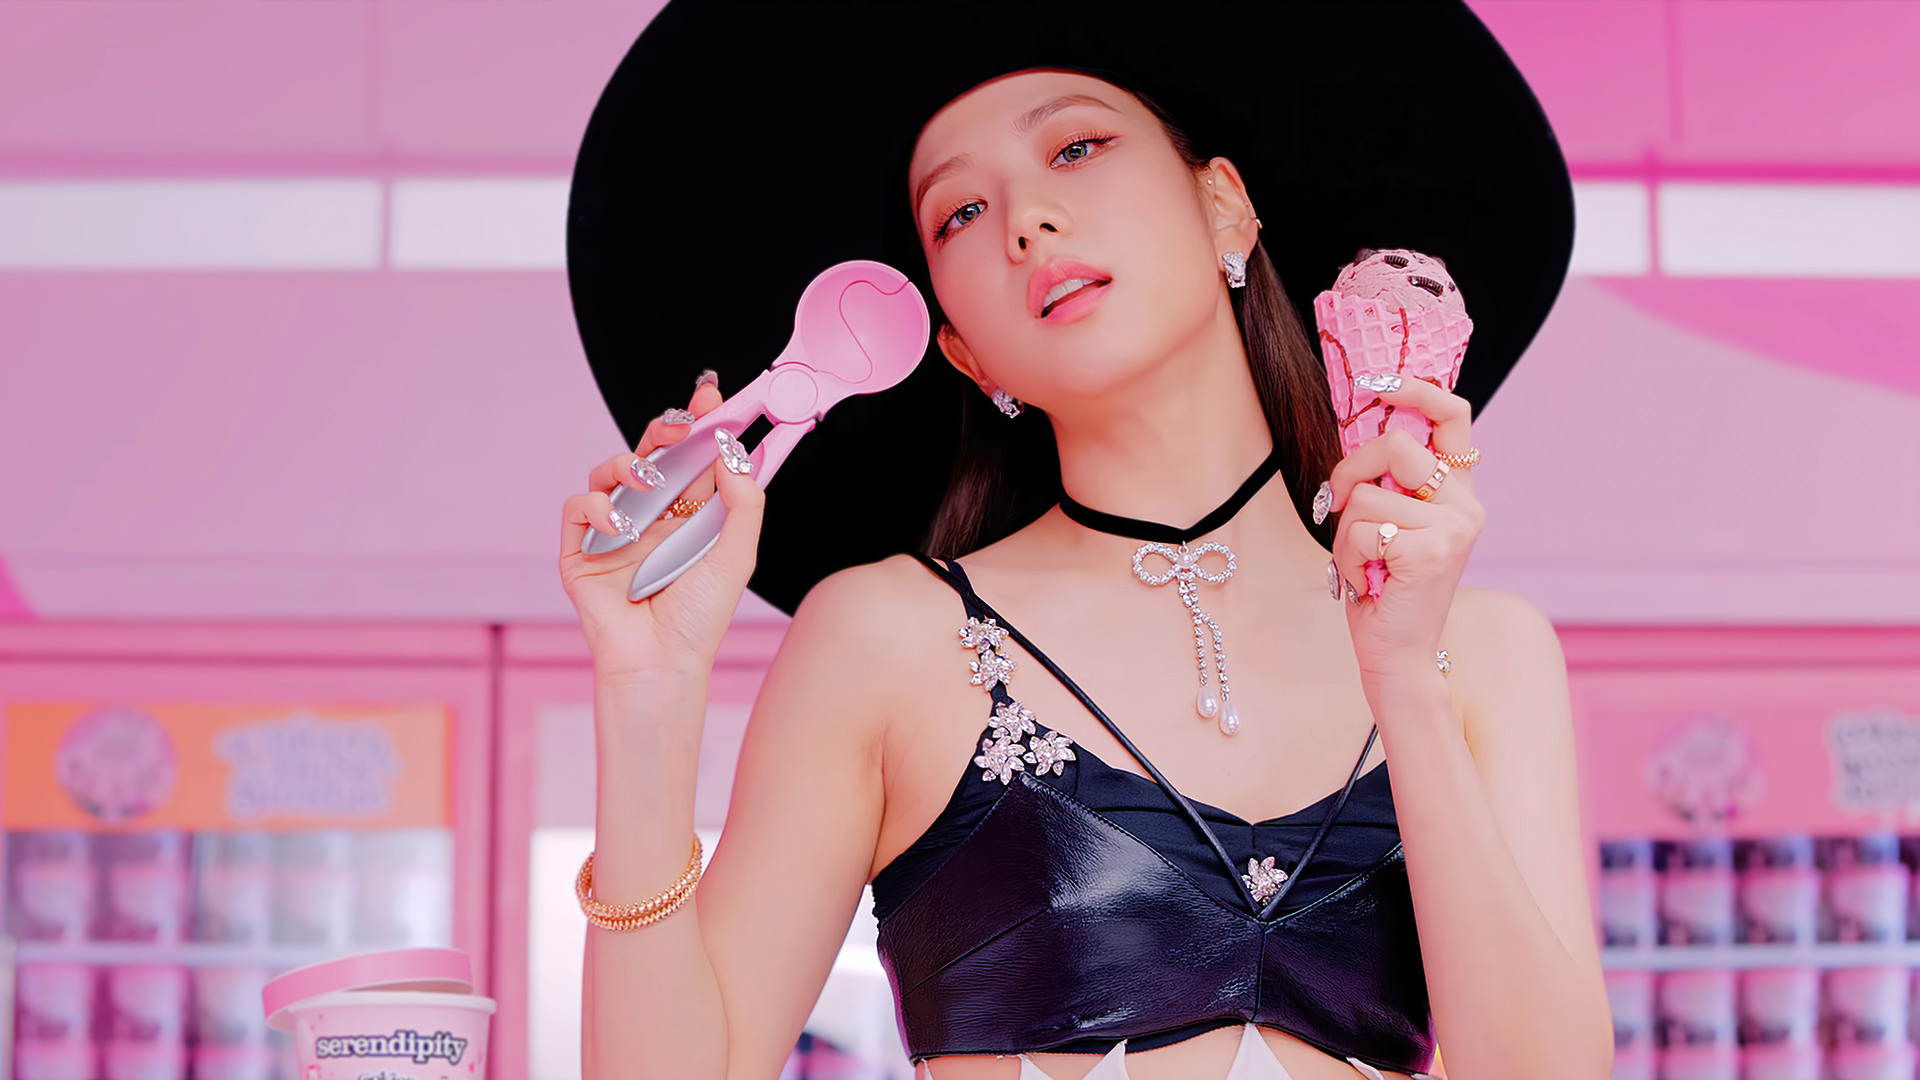 Jisoo Blackpink Ice Cream Wallpaper Hd Celebrities 4k Wallpapers Images Photos And Background Search free desktop wallpapers on zedge and personalize your phone to suit you. jisoo blackpink ice cream wallpaper hd